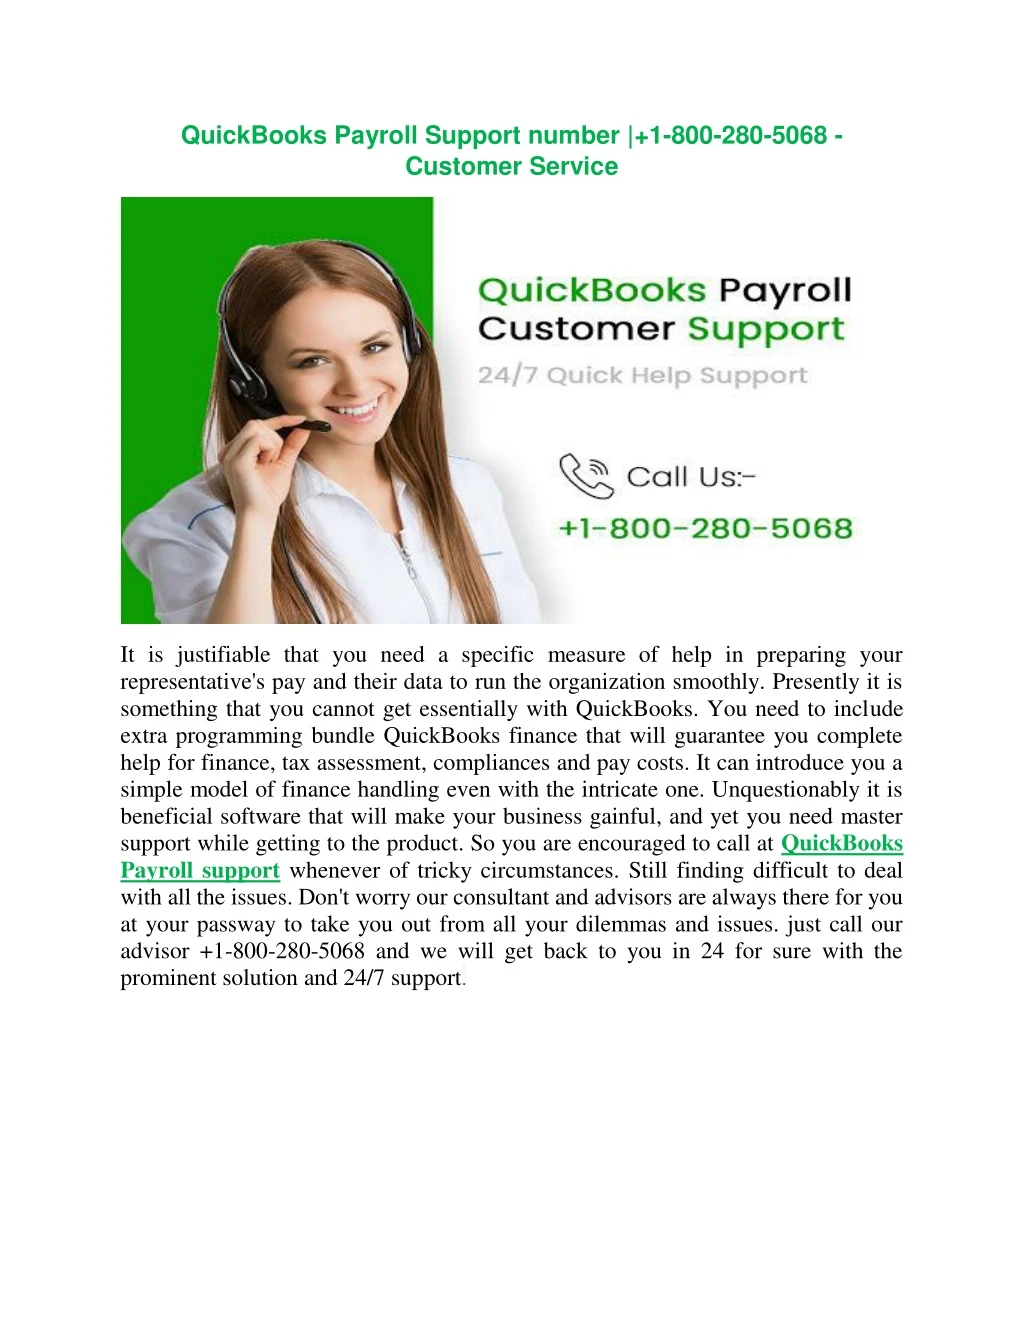 quickbooks payroll support number 1 800 280 5068